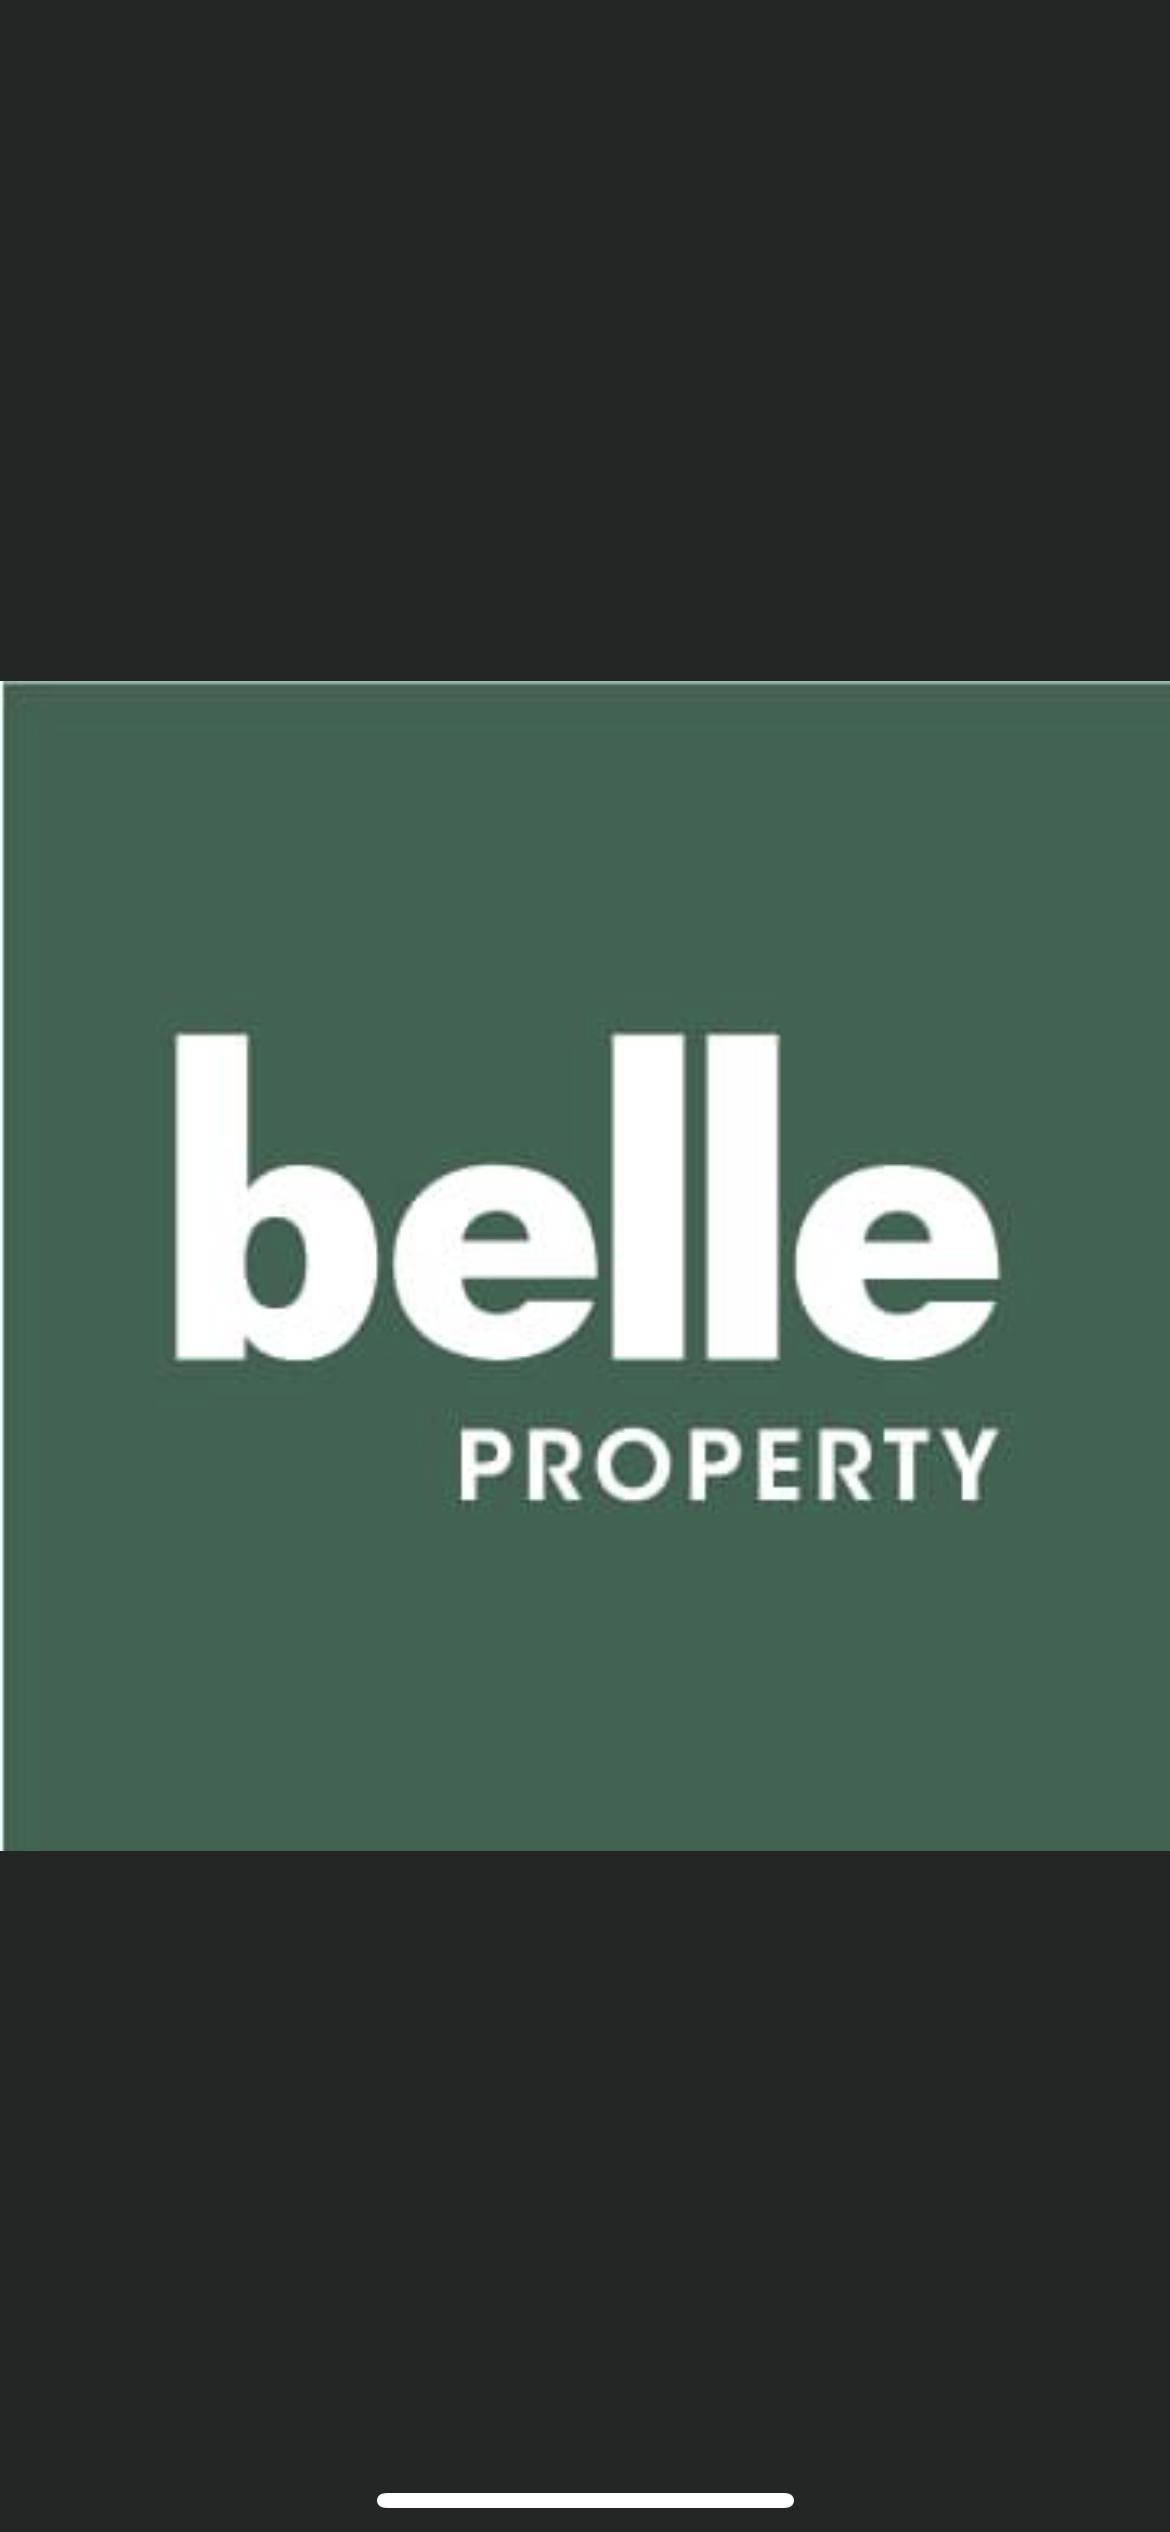 Belle Property Townsville City | 137 Ingham Rd, West End QLD 4810, Australia | Phone: 07 4726 6000